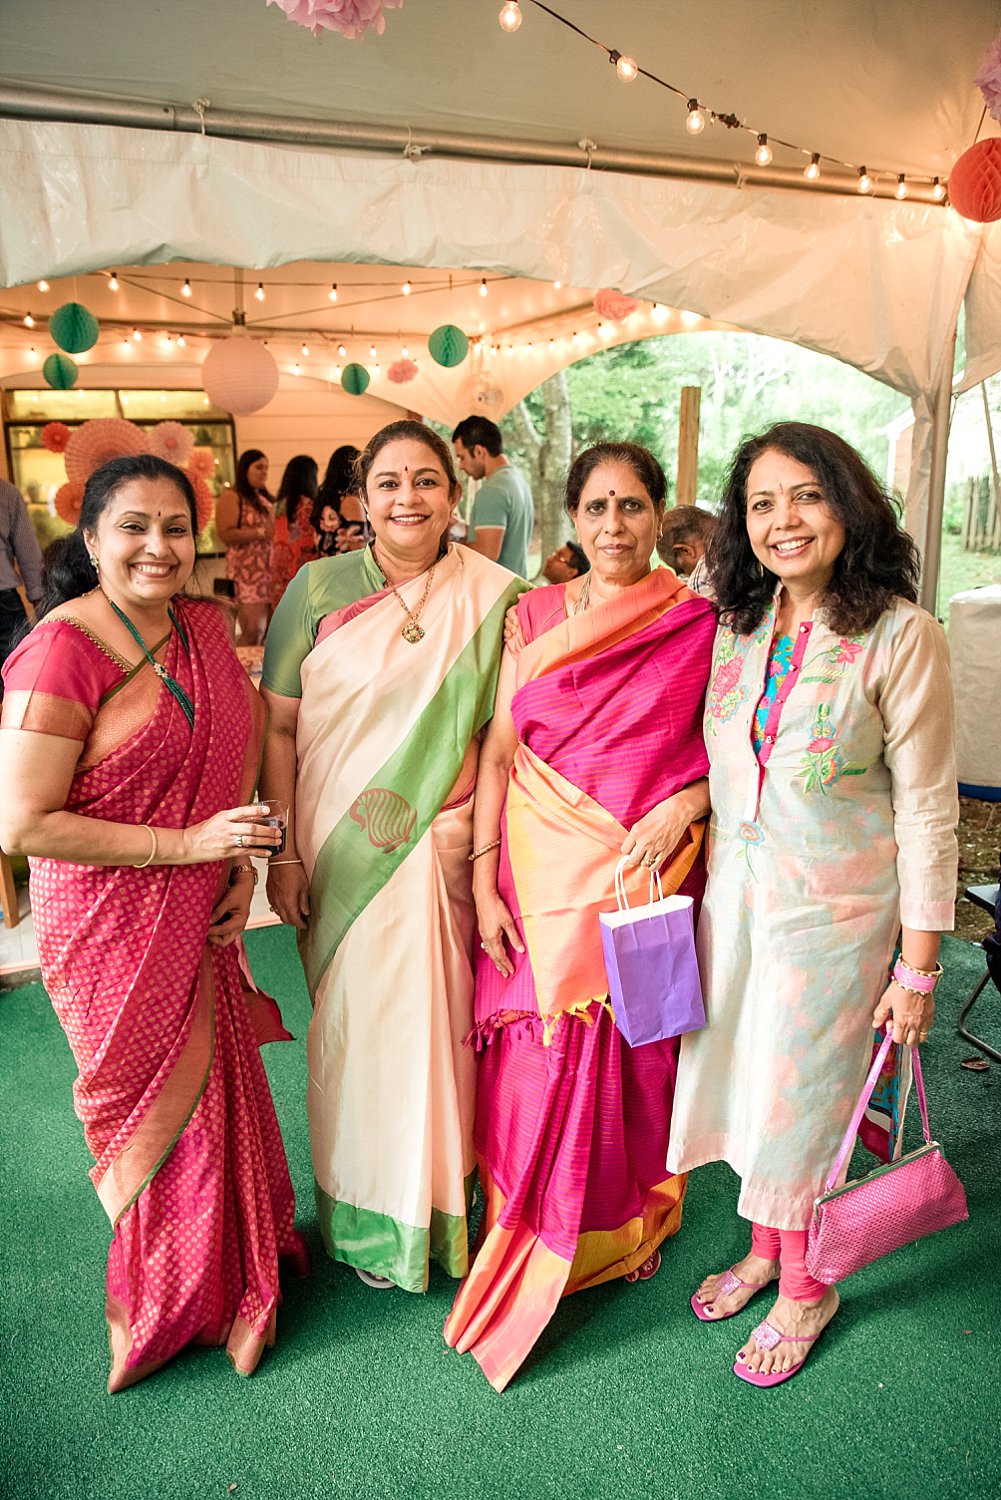 4 women in Saris at baby shower in Roswell, GA